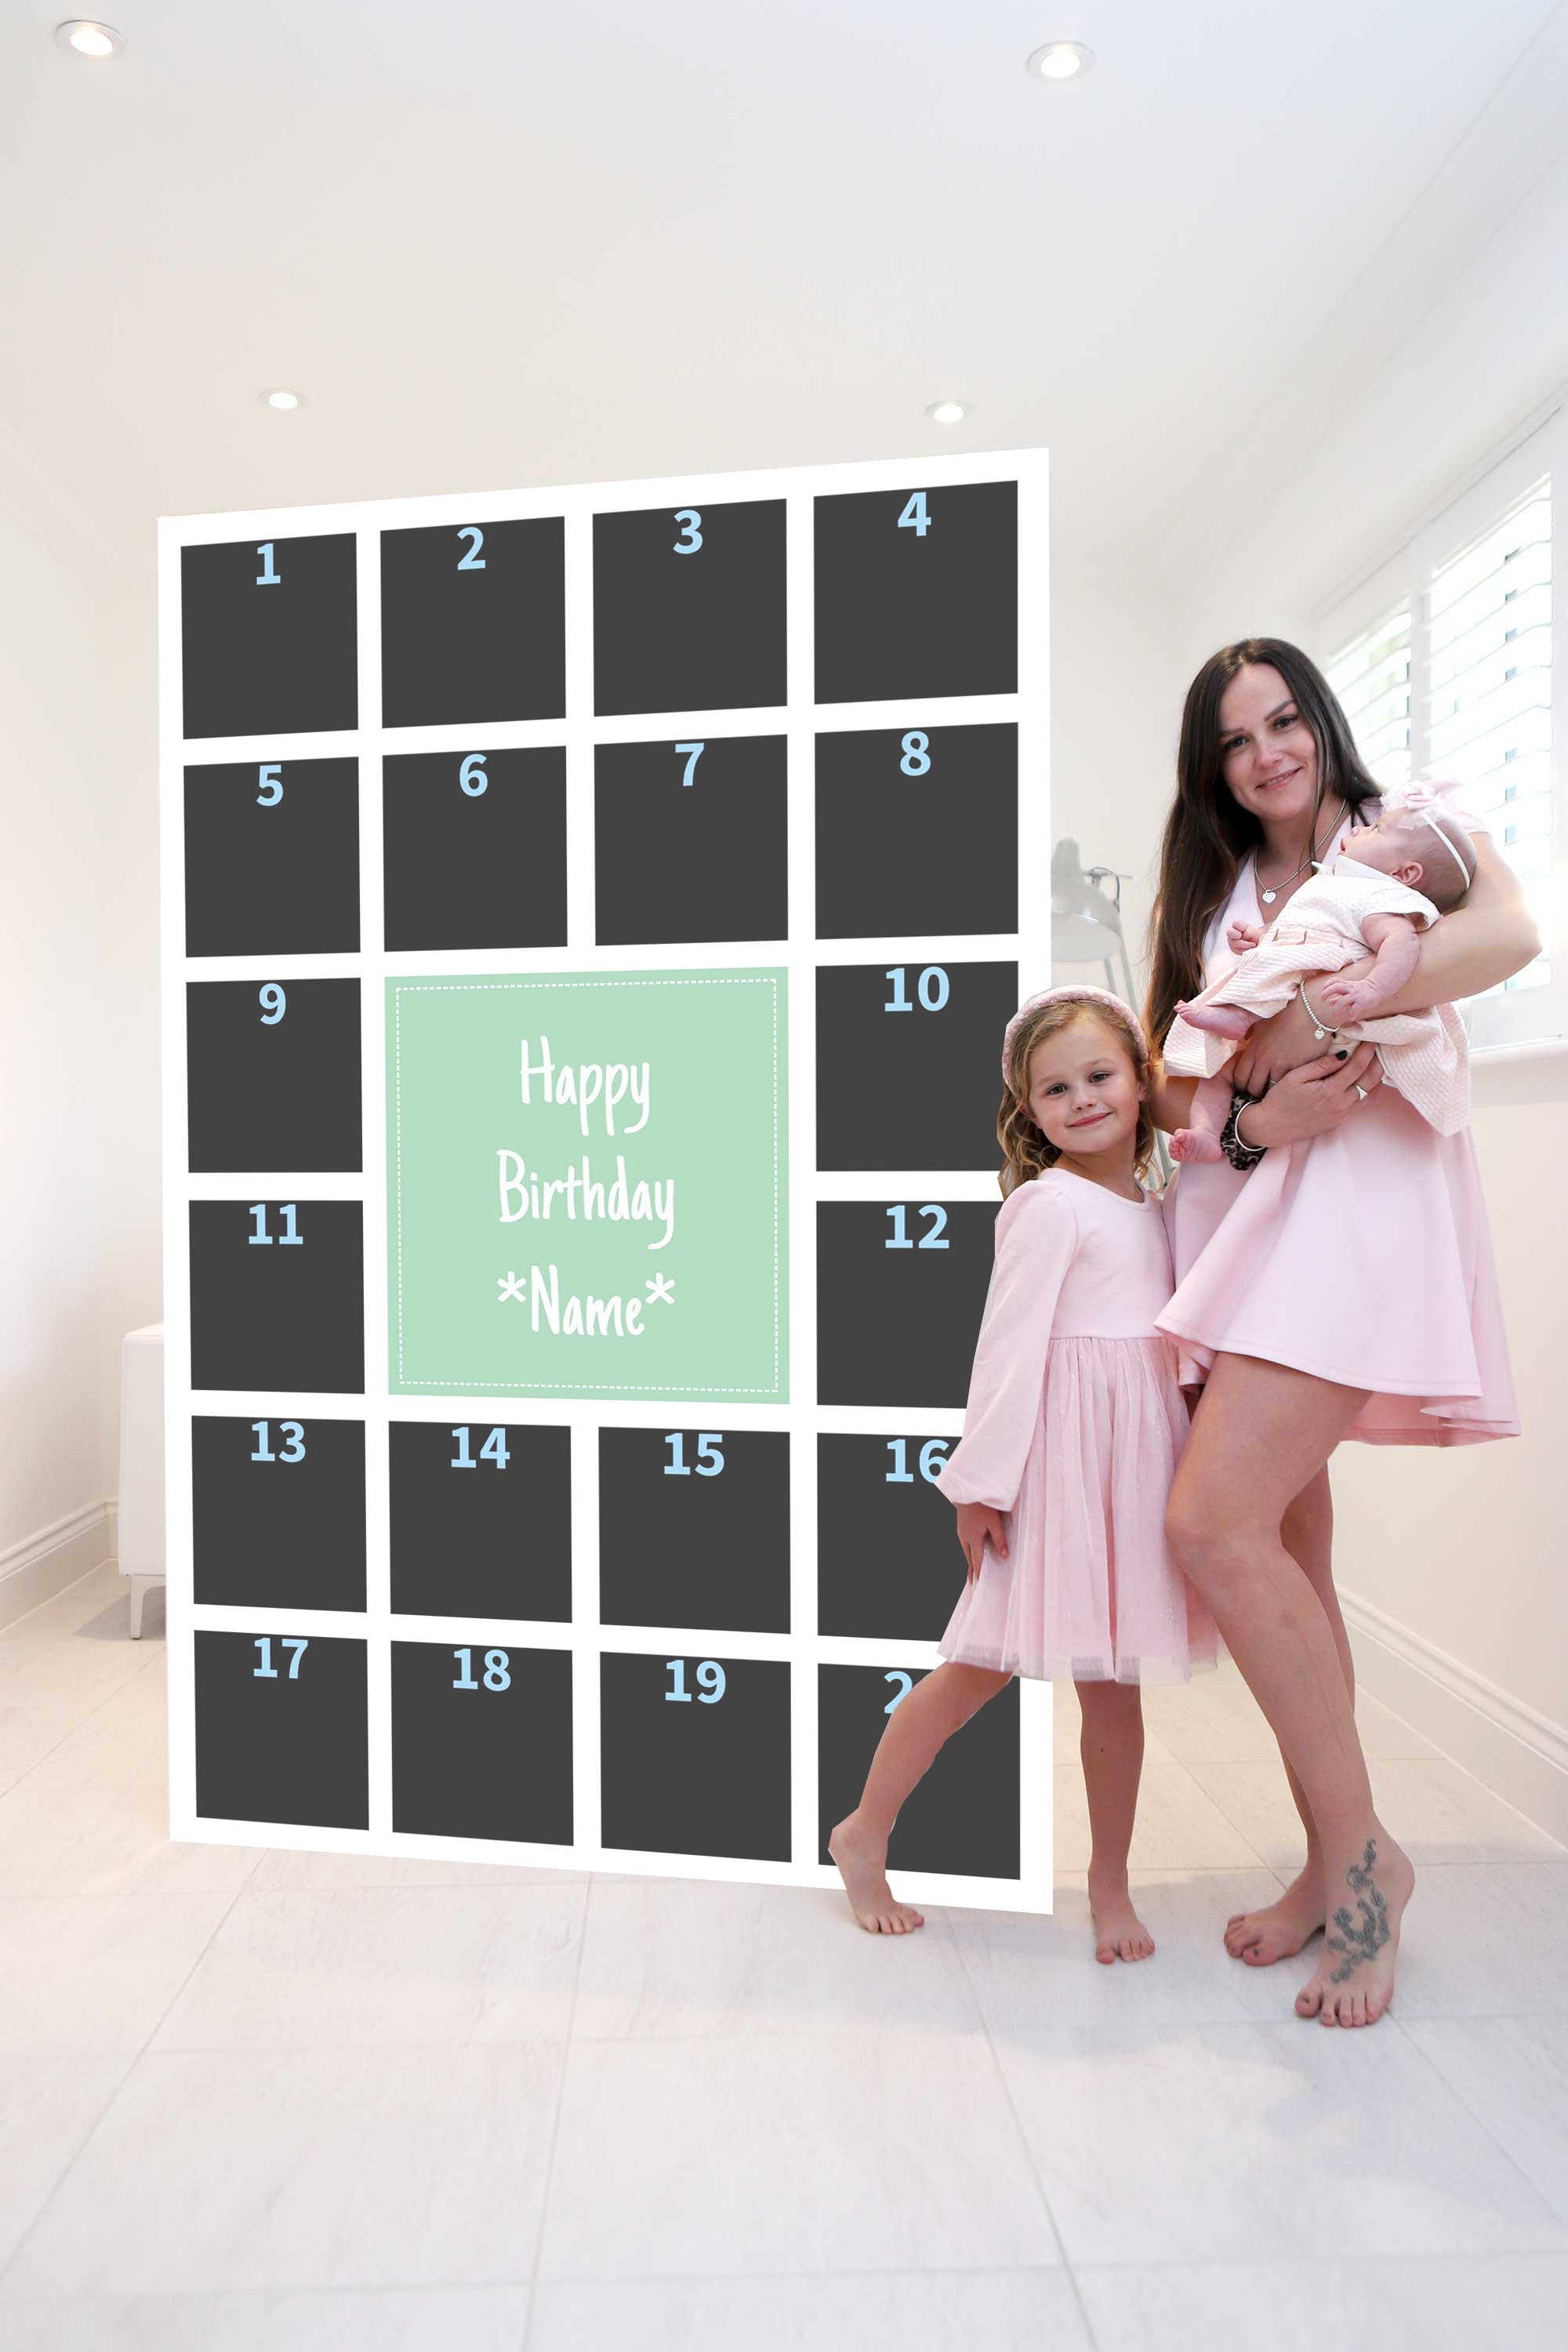 20 image photo collage giant card